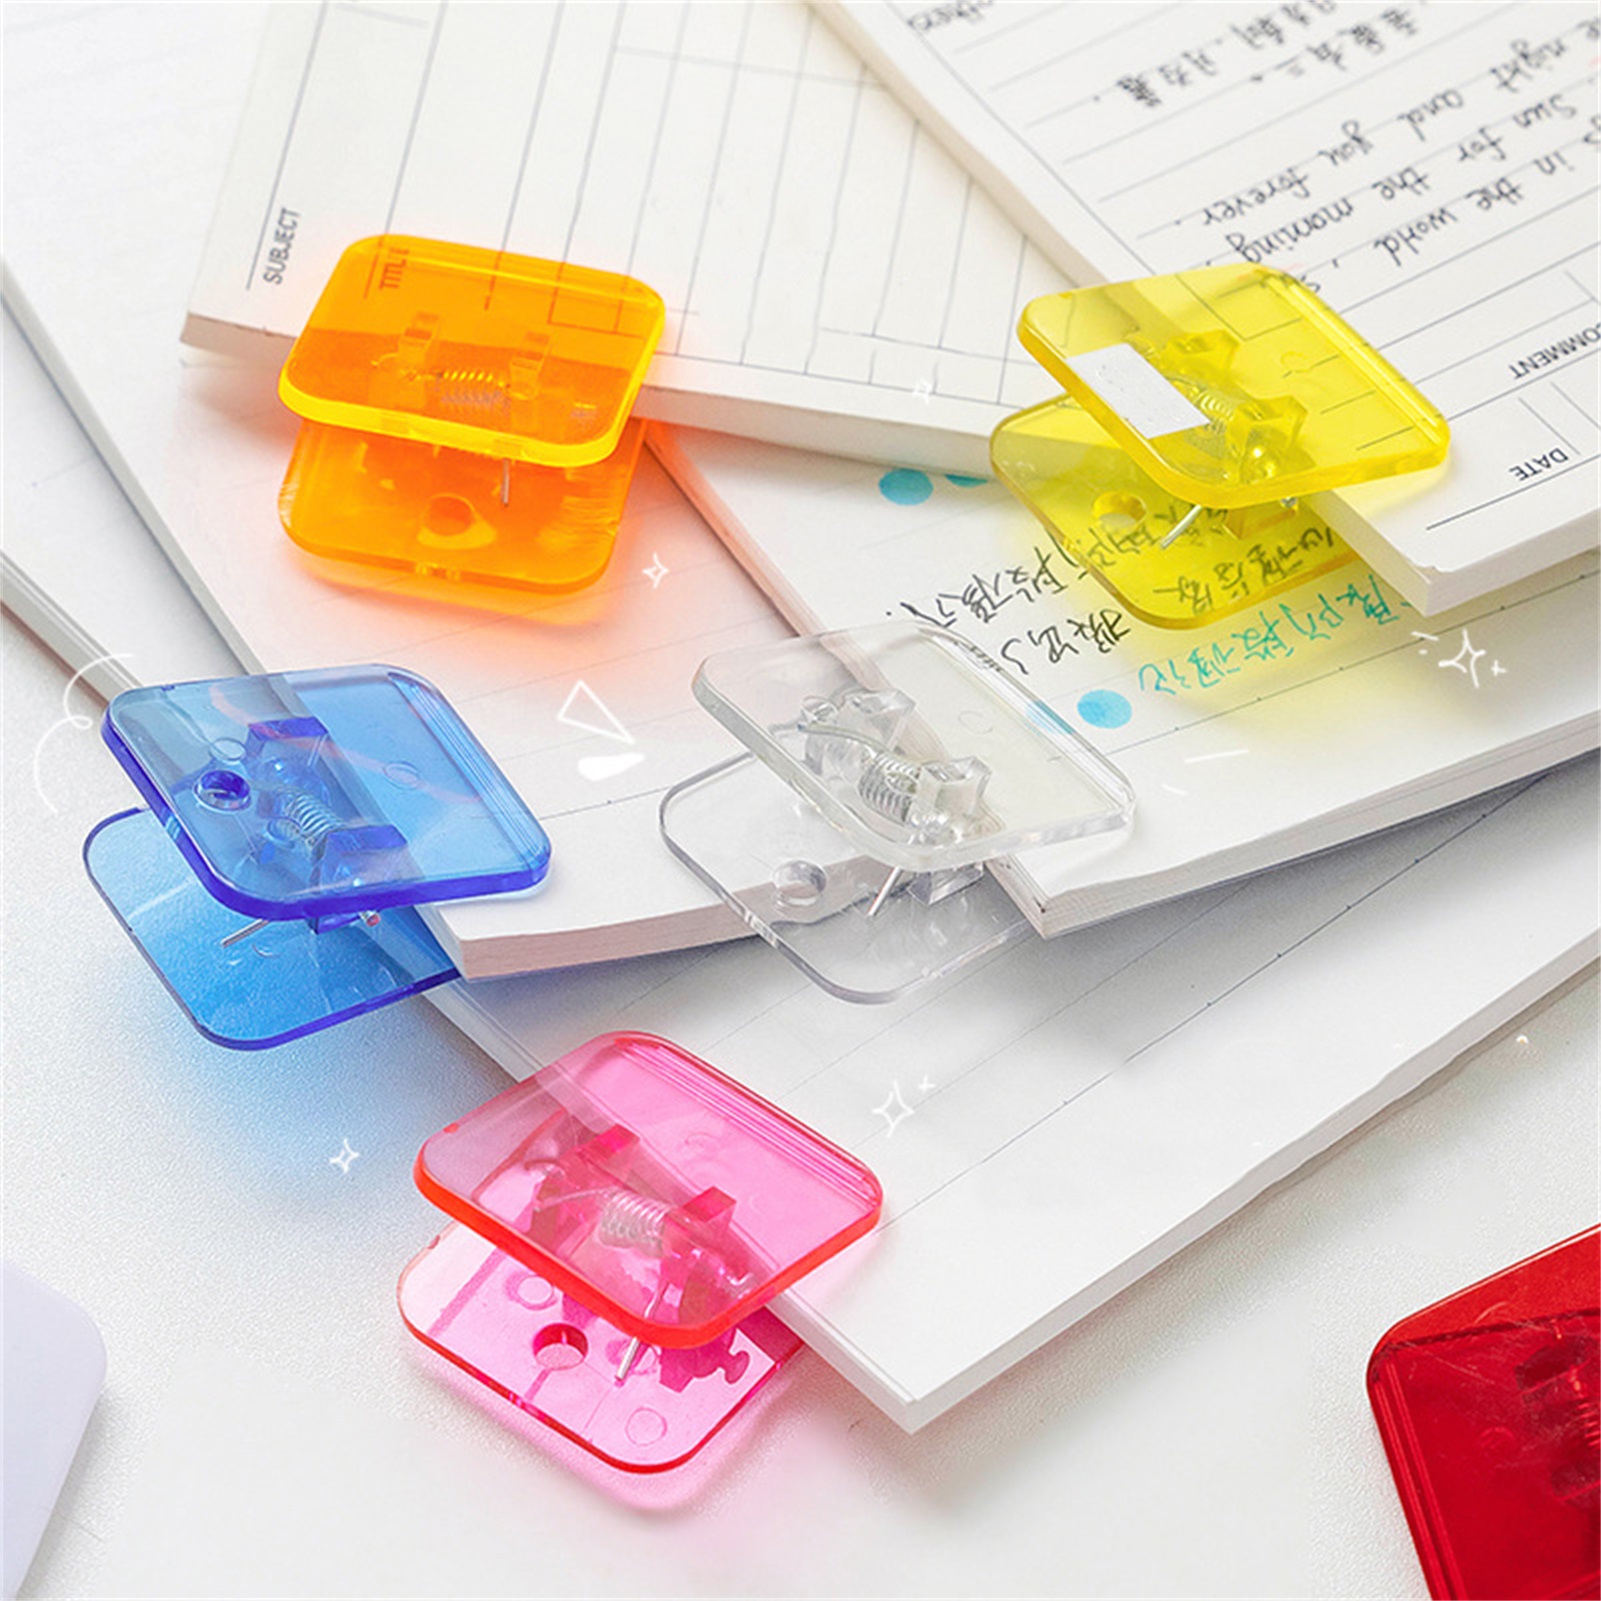 Yesbay 5Pcs File Clip Indeformable Acrylic Widely Used Square Binder Clip Office Supplies - image 1 of 8